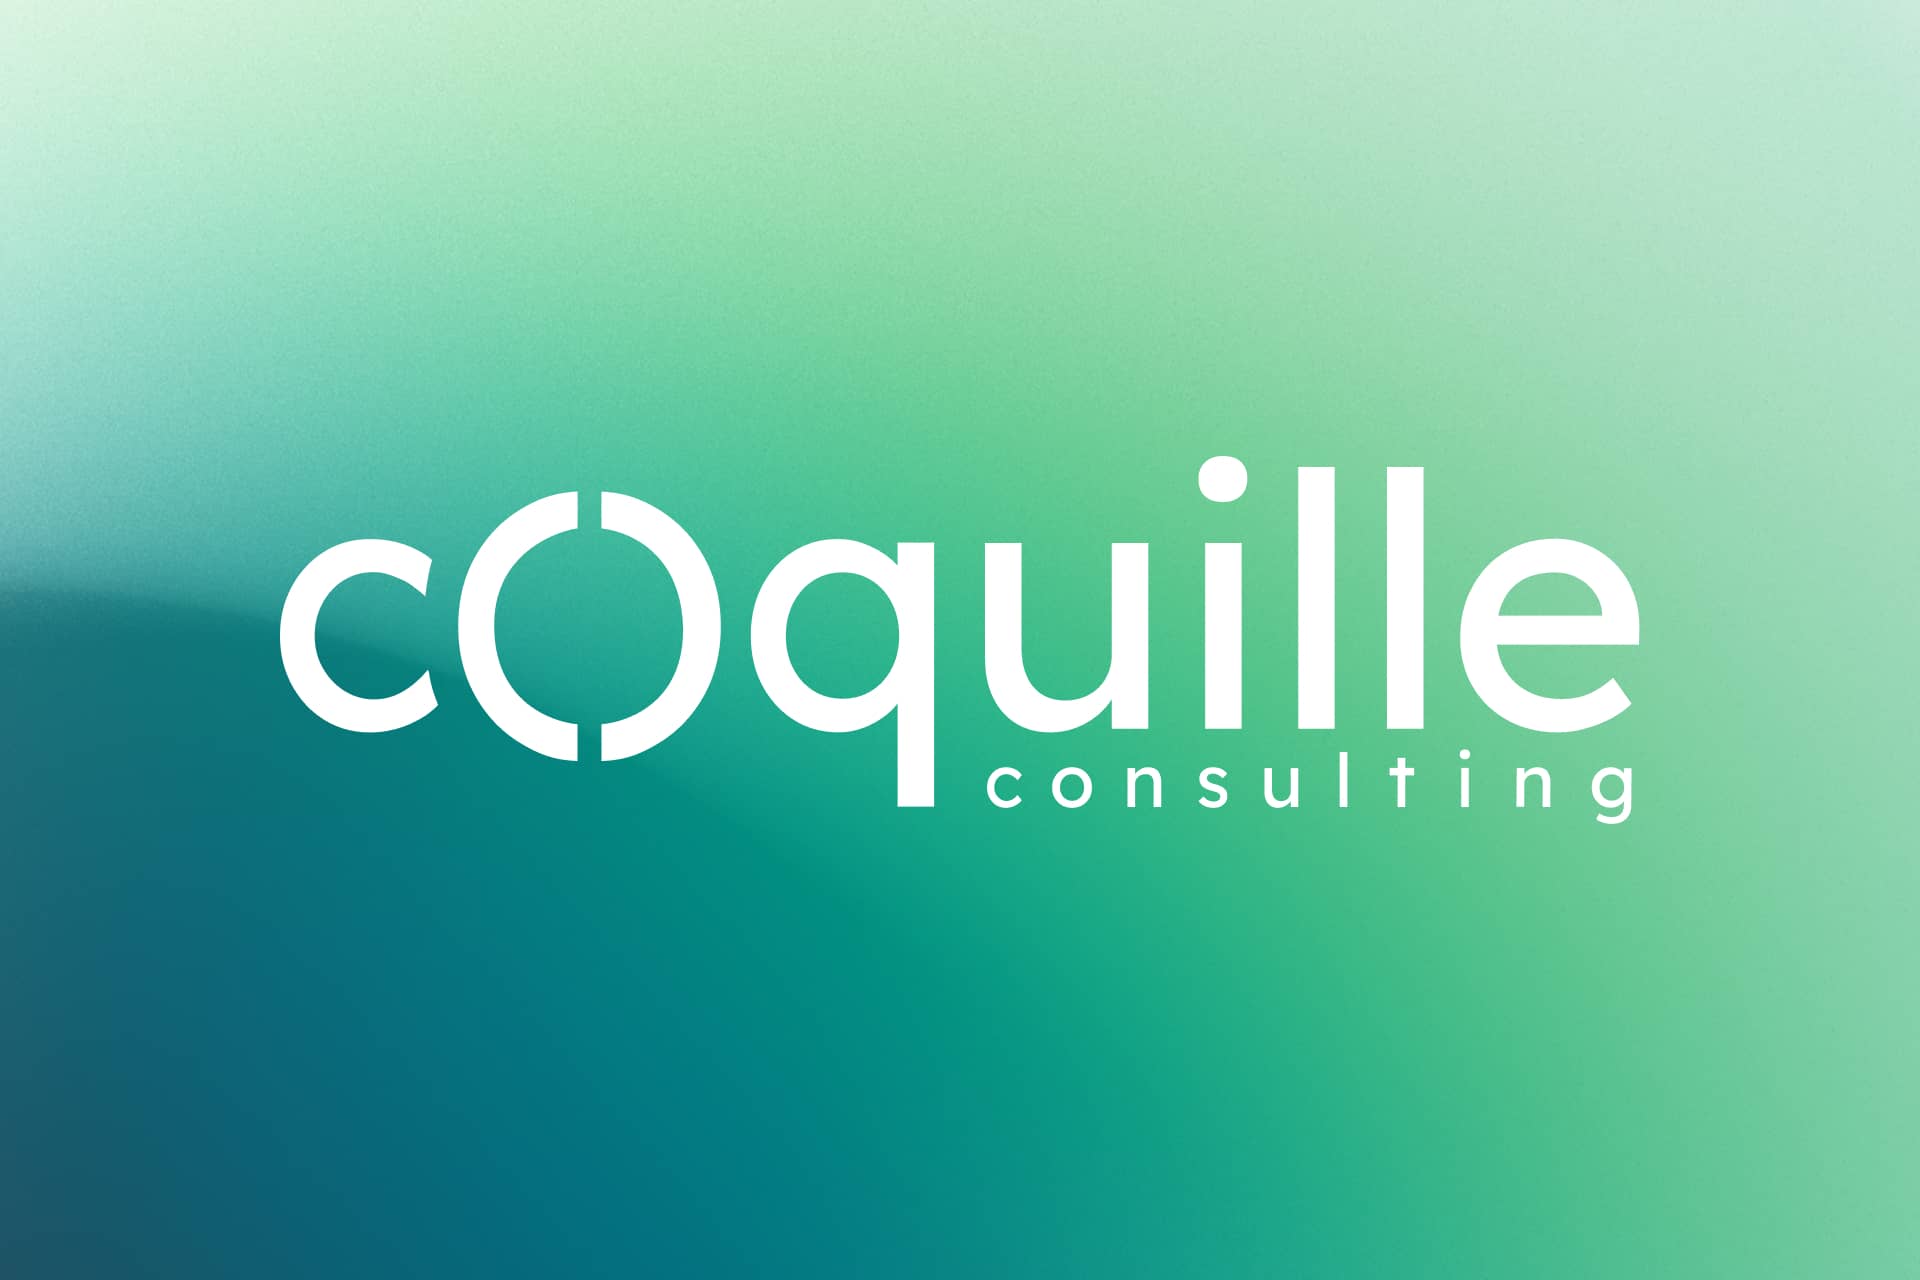 coquille consulting image